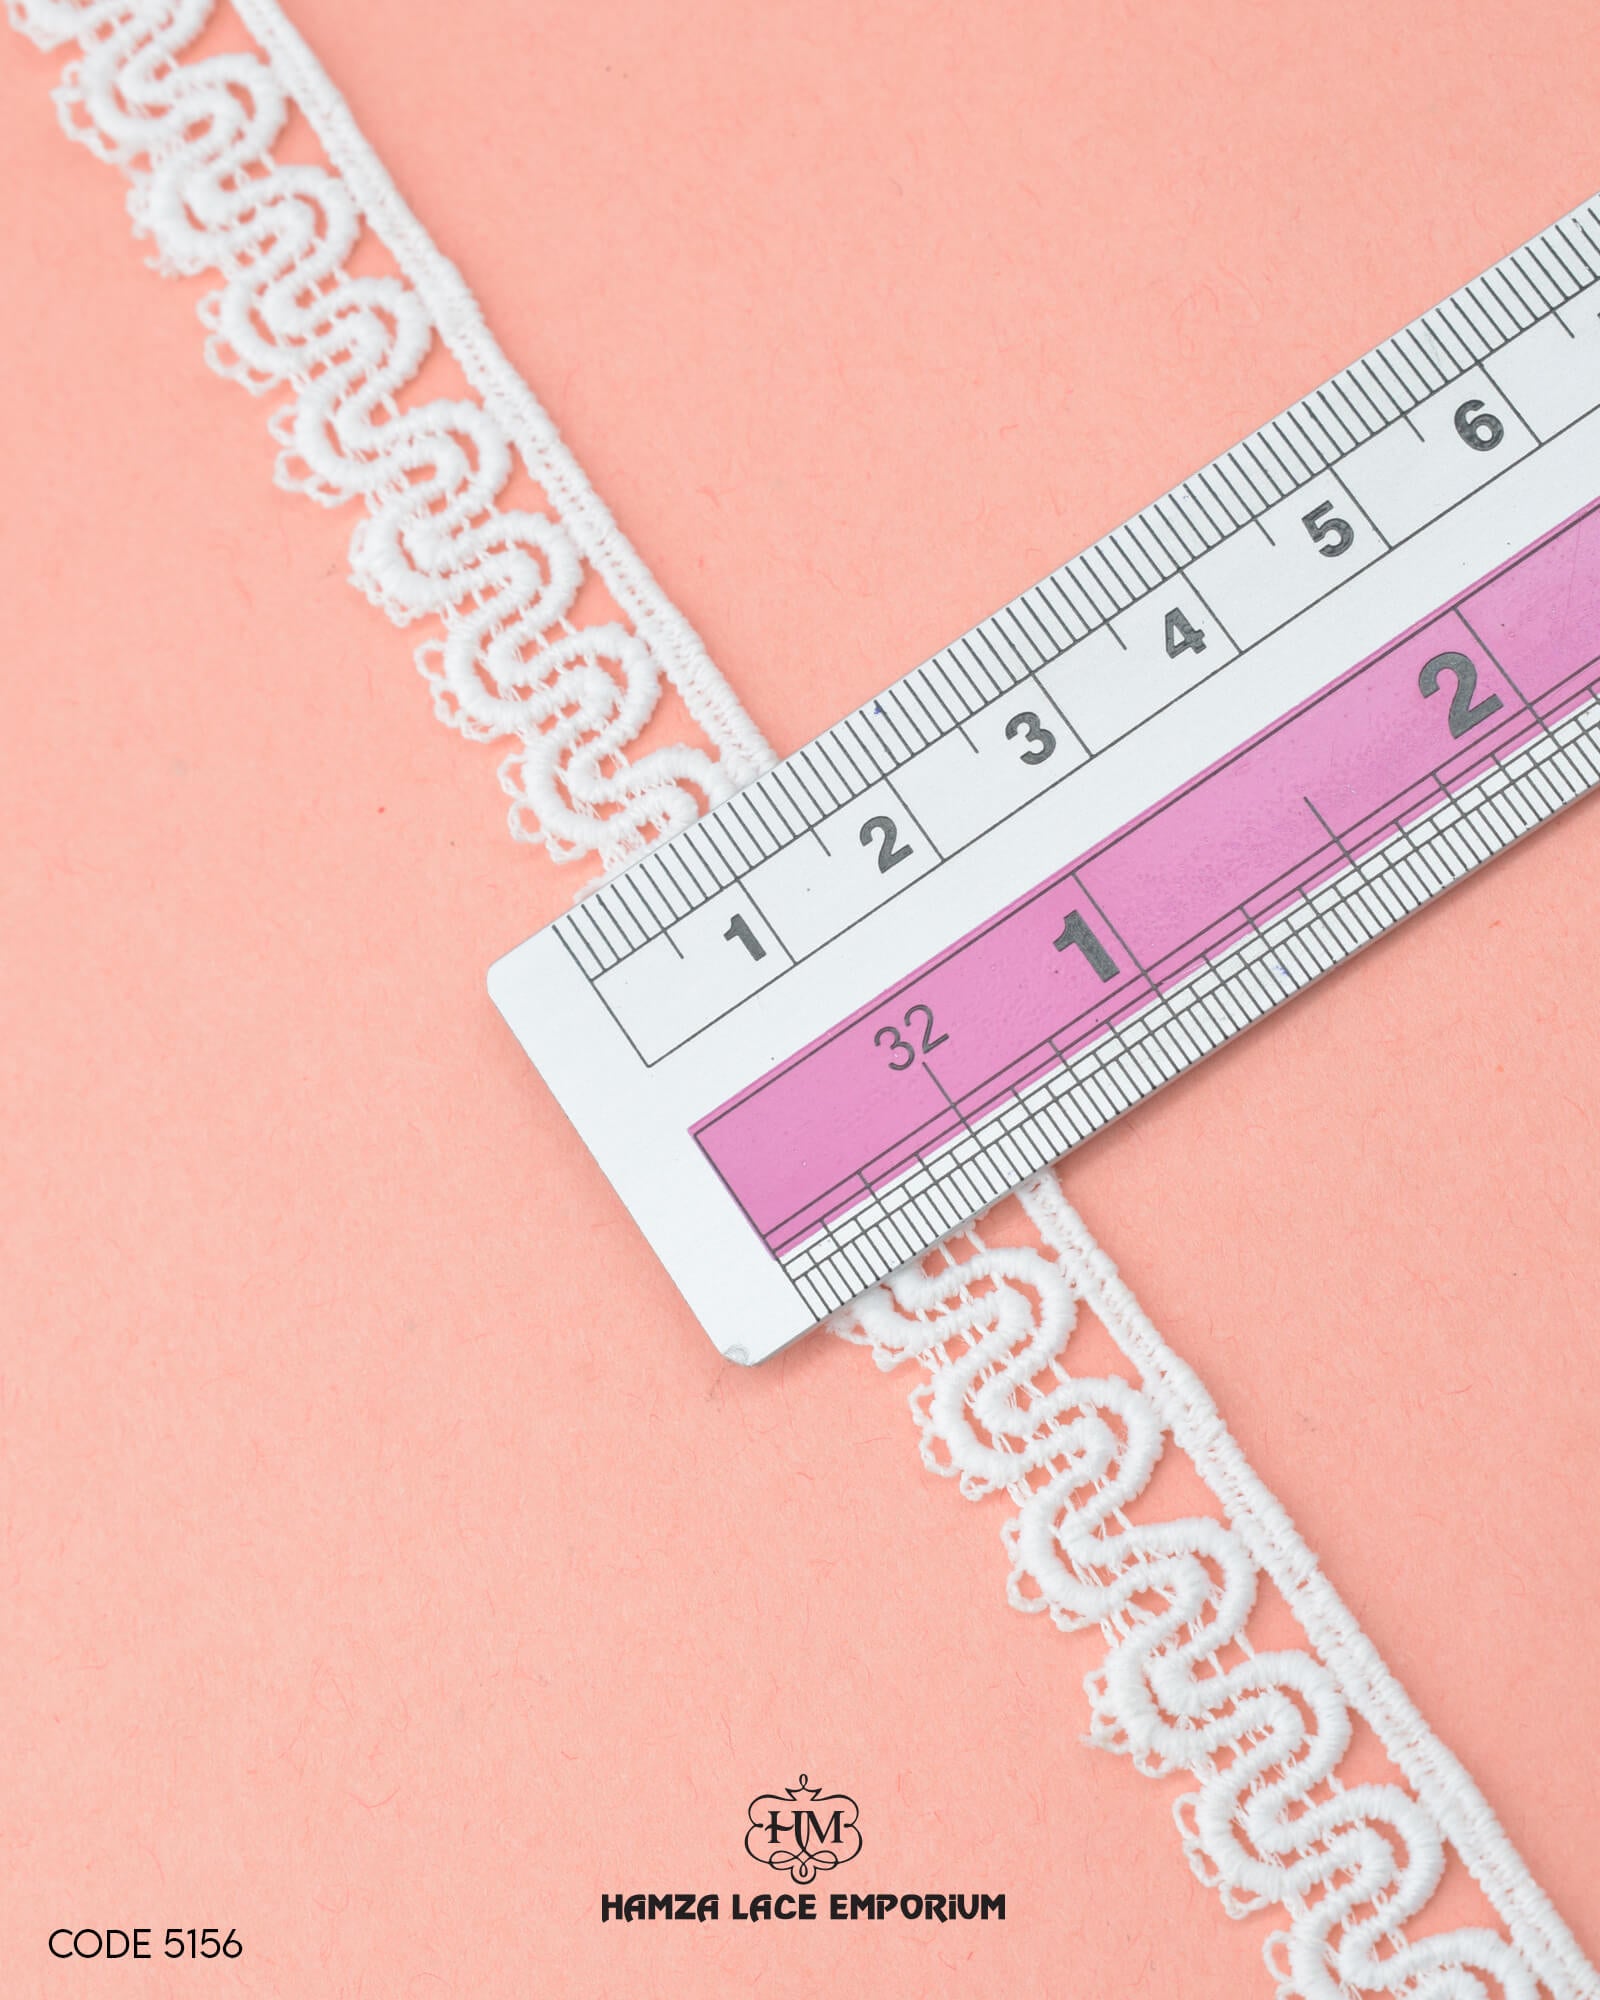 Size of the 'Edging Scallop Lace 5156' is shown as '0.5' inches with the help of a ruler